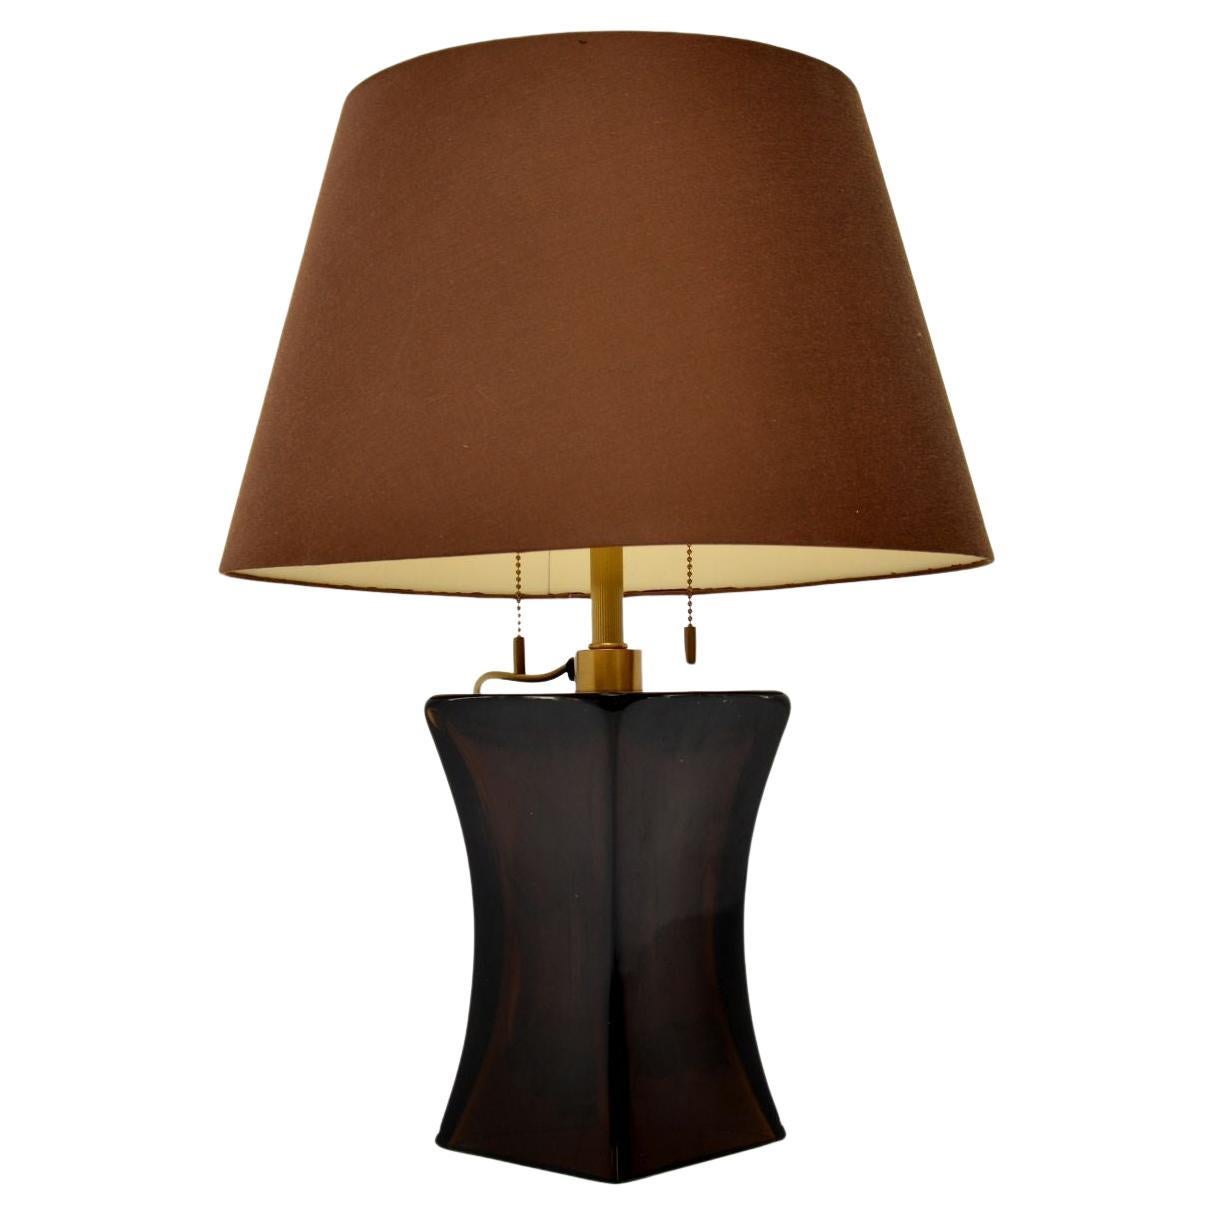 Italian Murano Glass Torre Table Lamp by Donghia For Sale